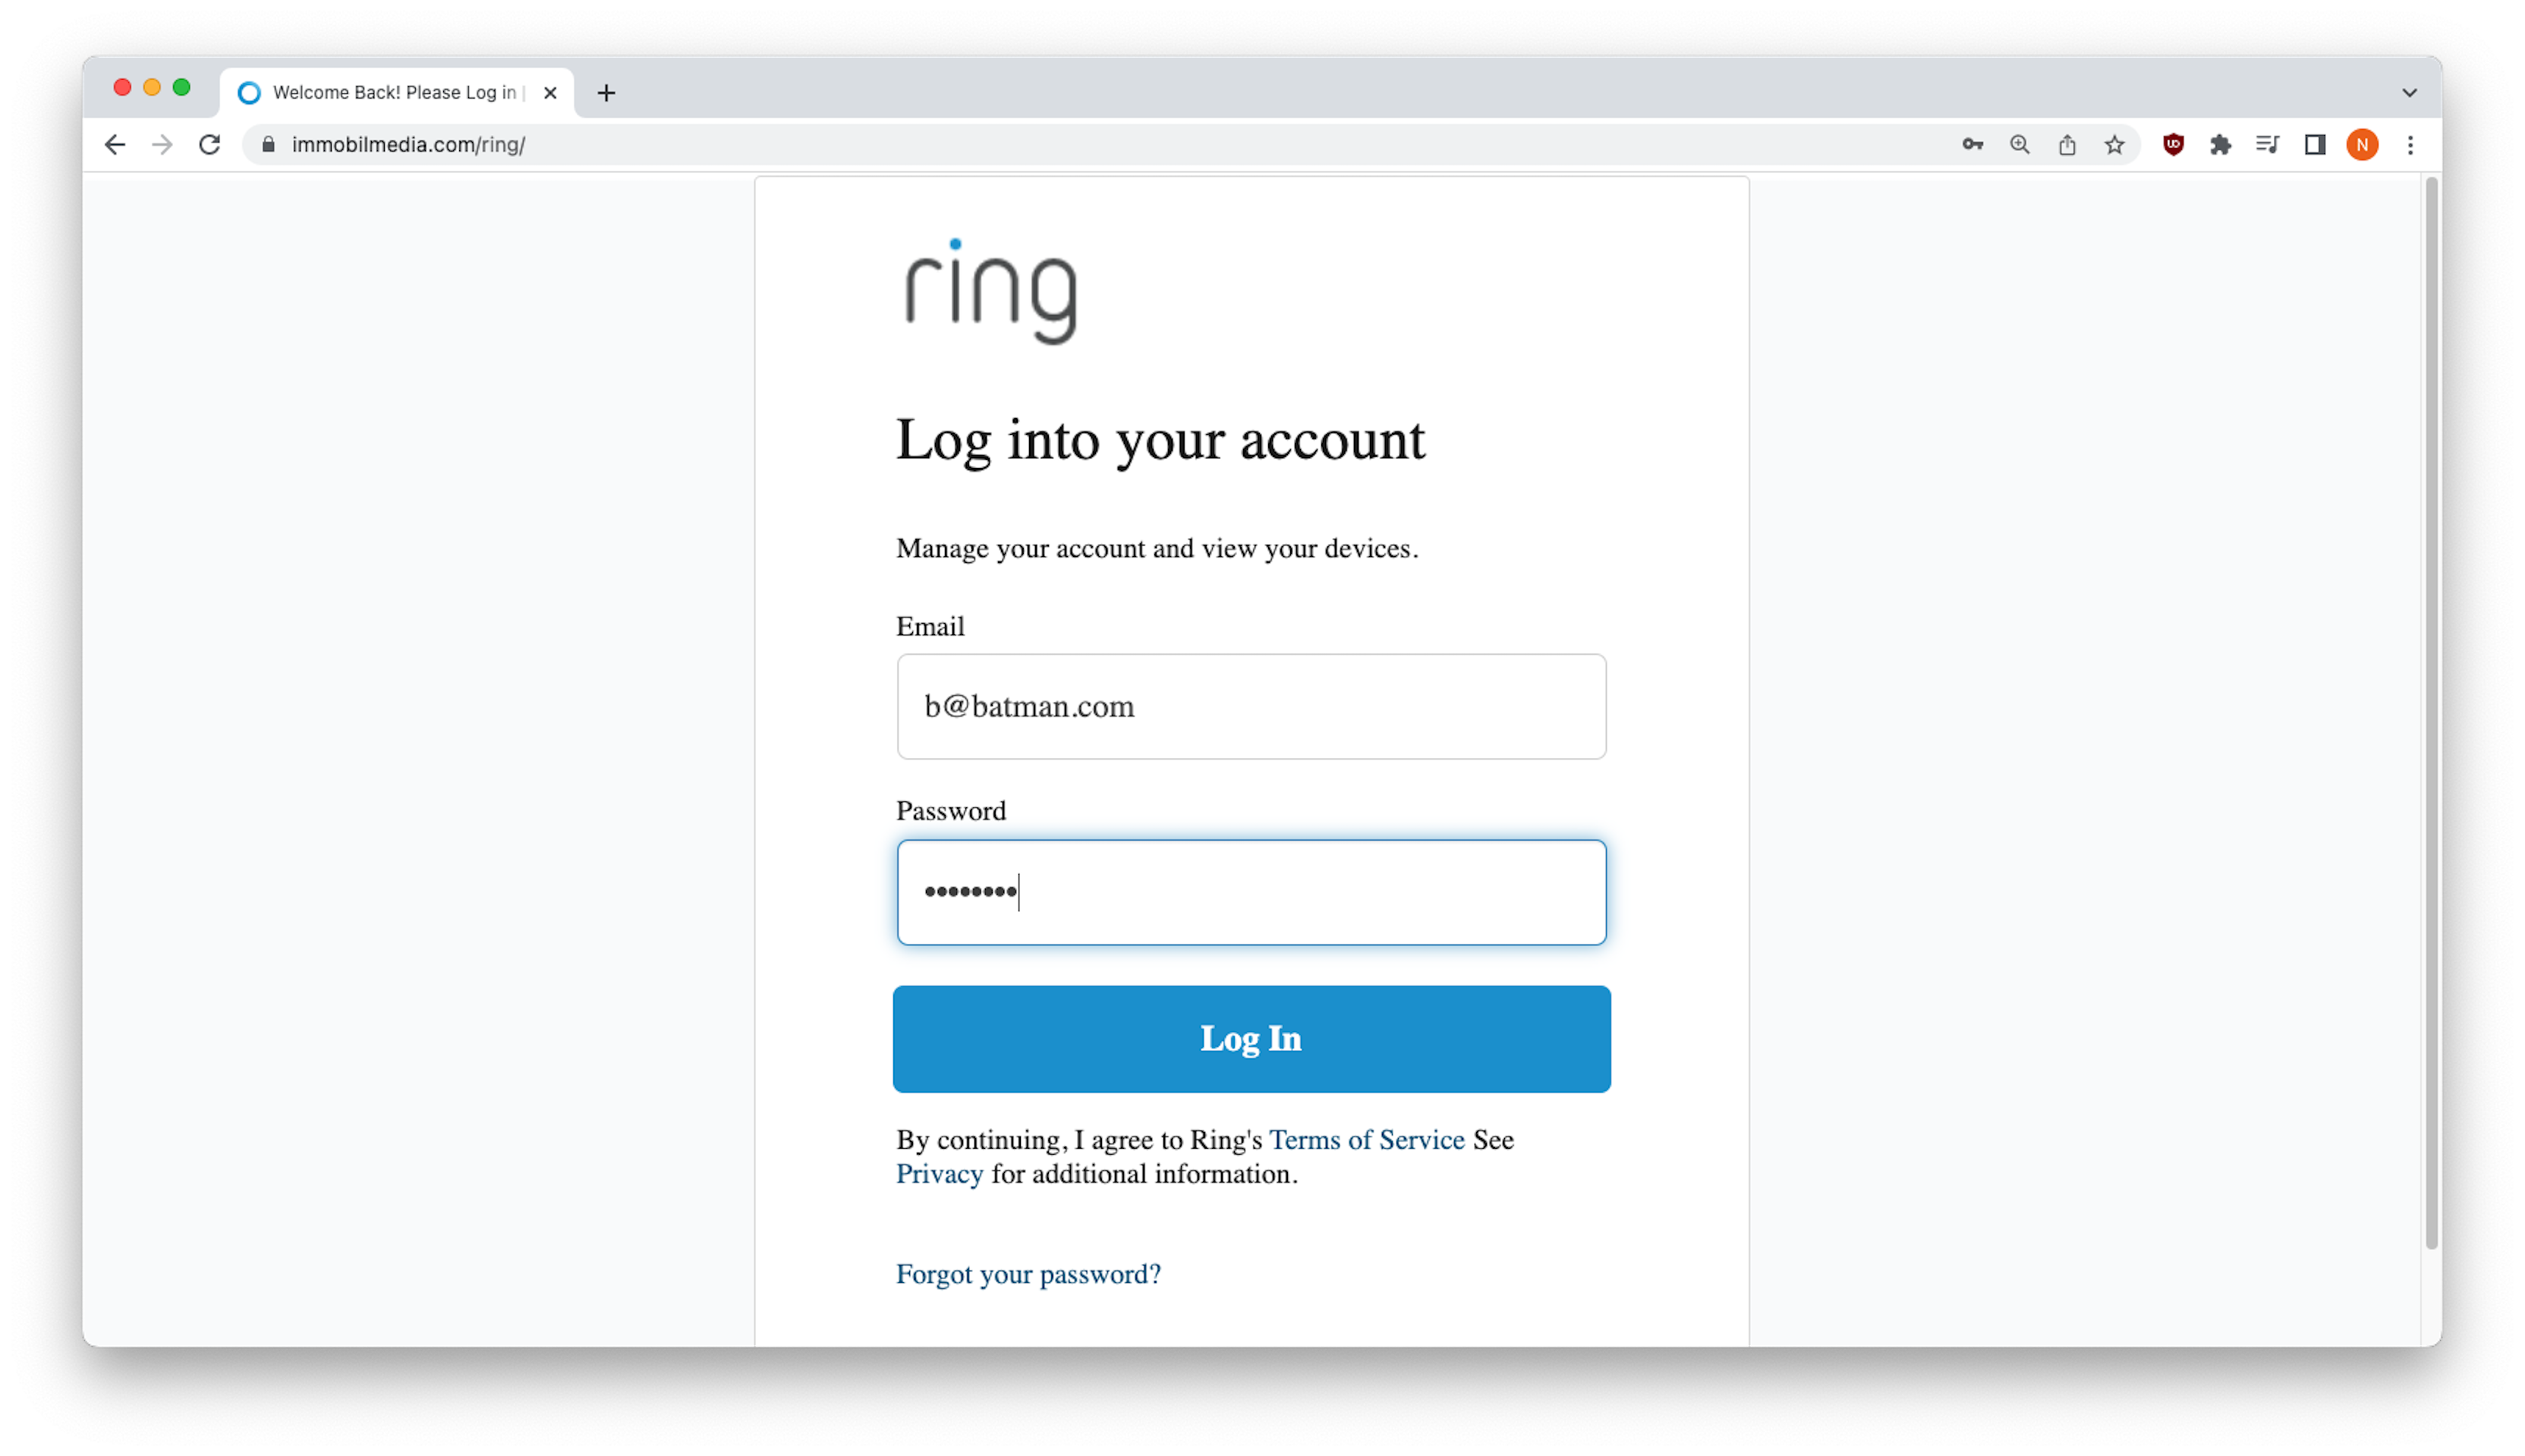 Fresh Phish: Ring Customers Find Themselves at the Front Door of a Data  Harvesting Scheme